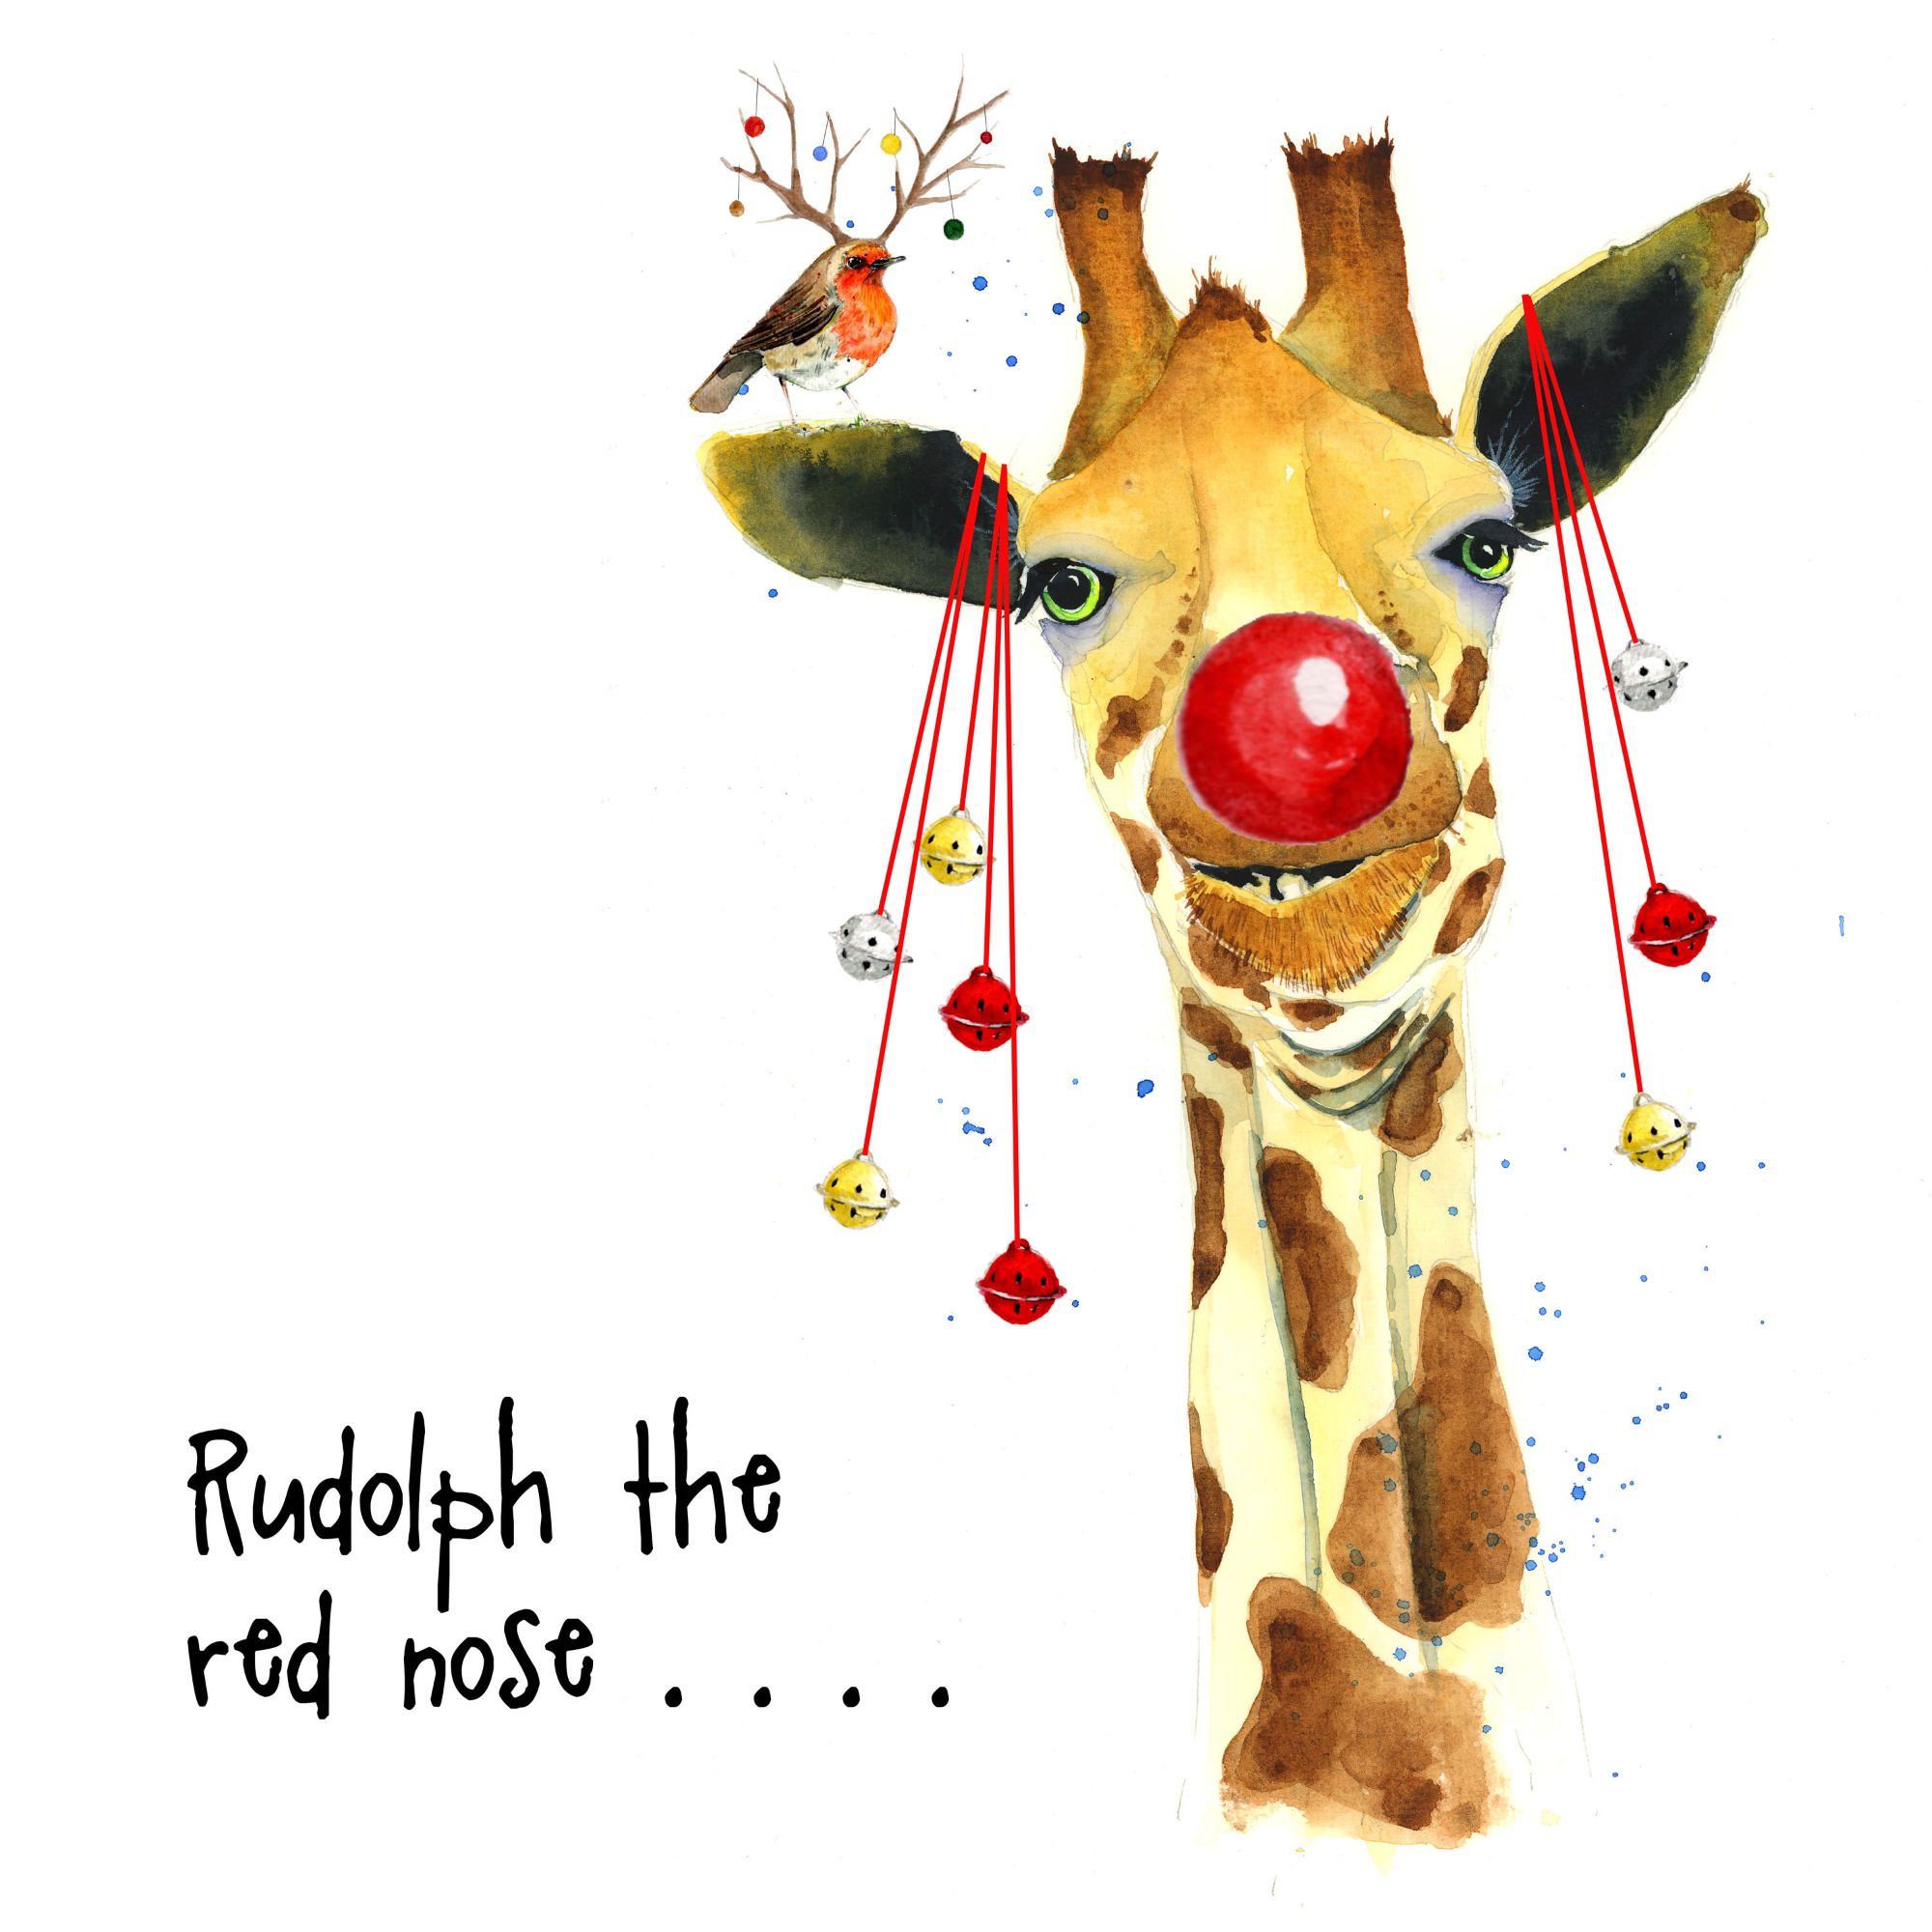 Rudolph the red nose Etsy copy